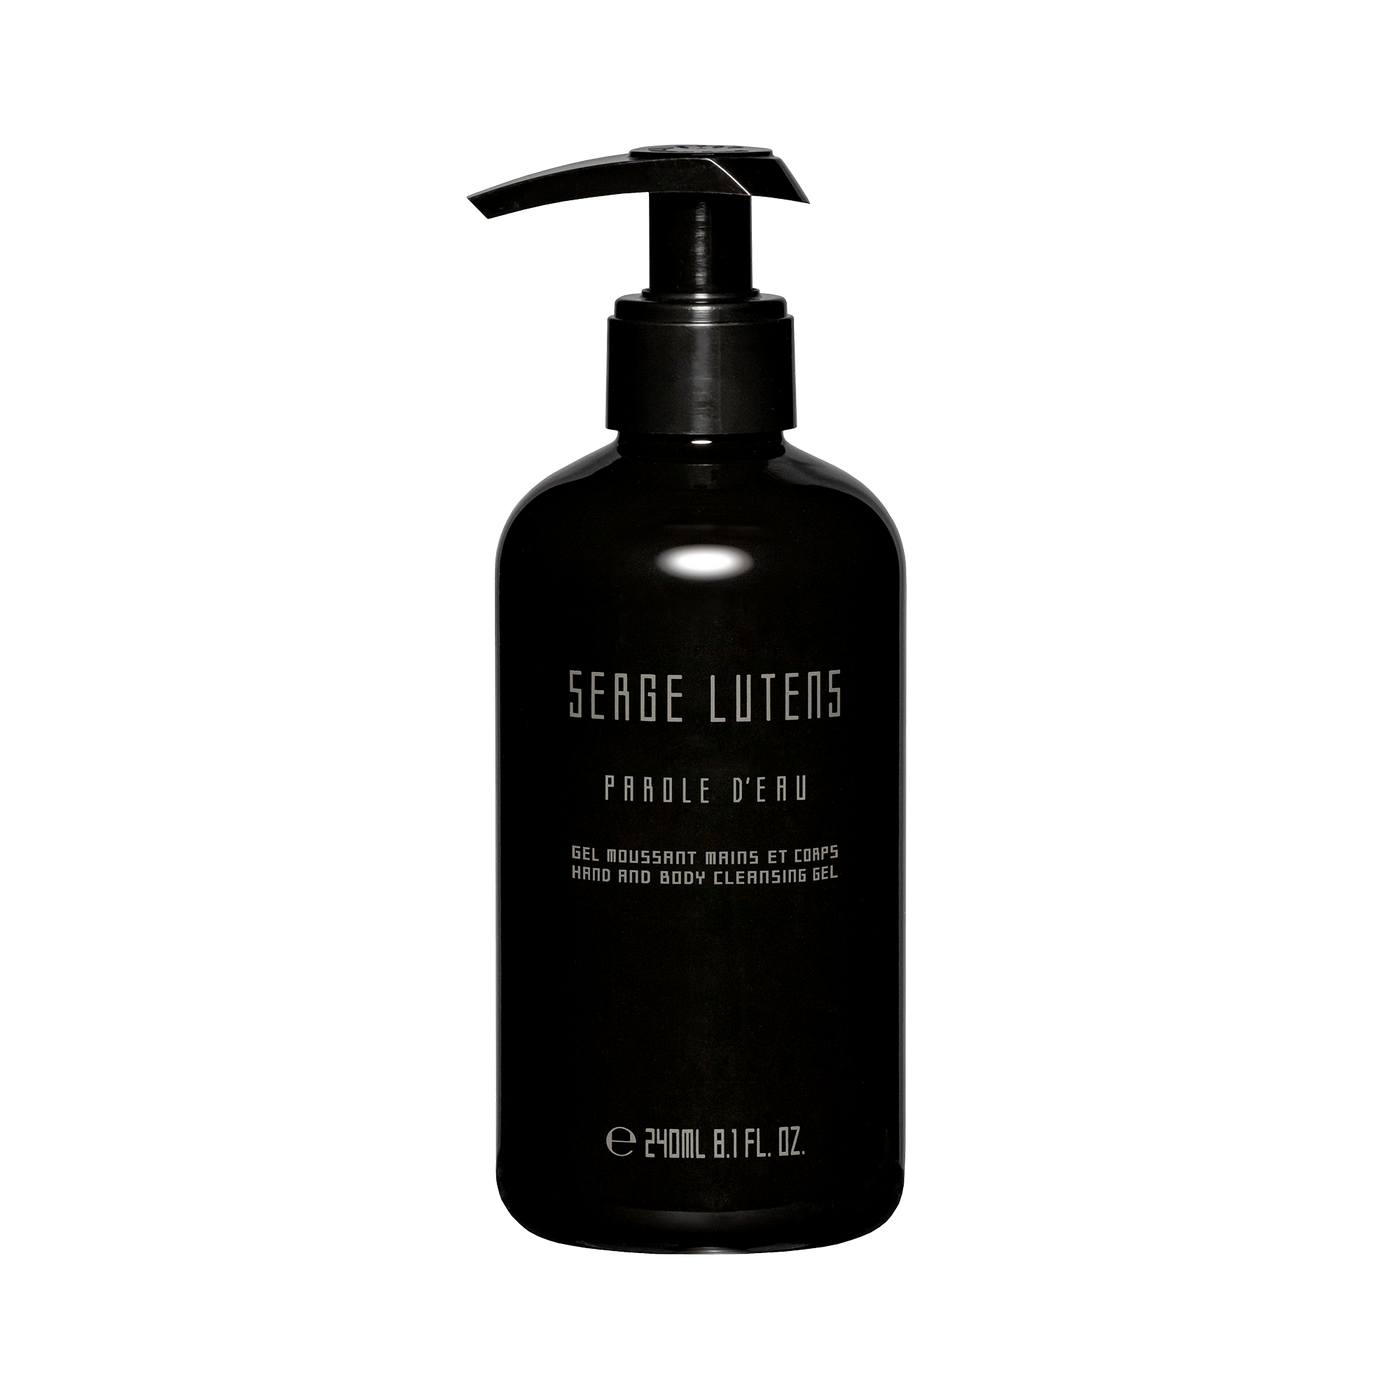 Serge Lutens Parole D'Eau For Men And Women 240Ml Hand And Body Cleansing Gel